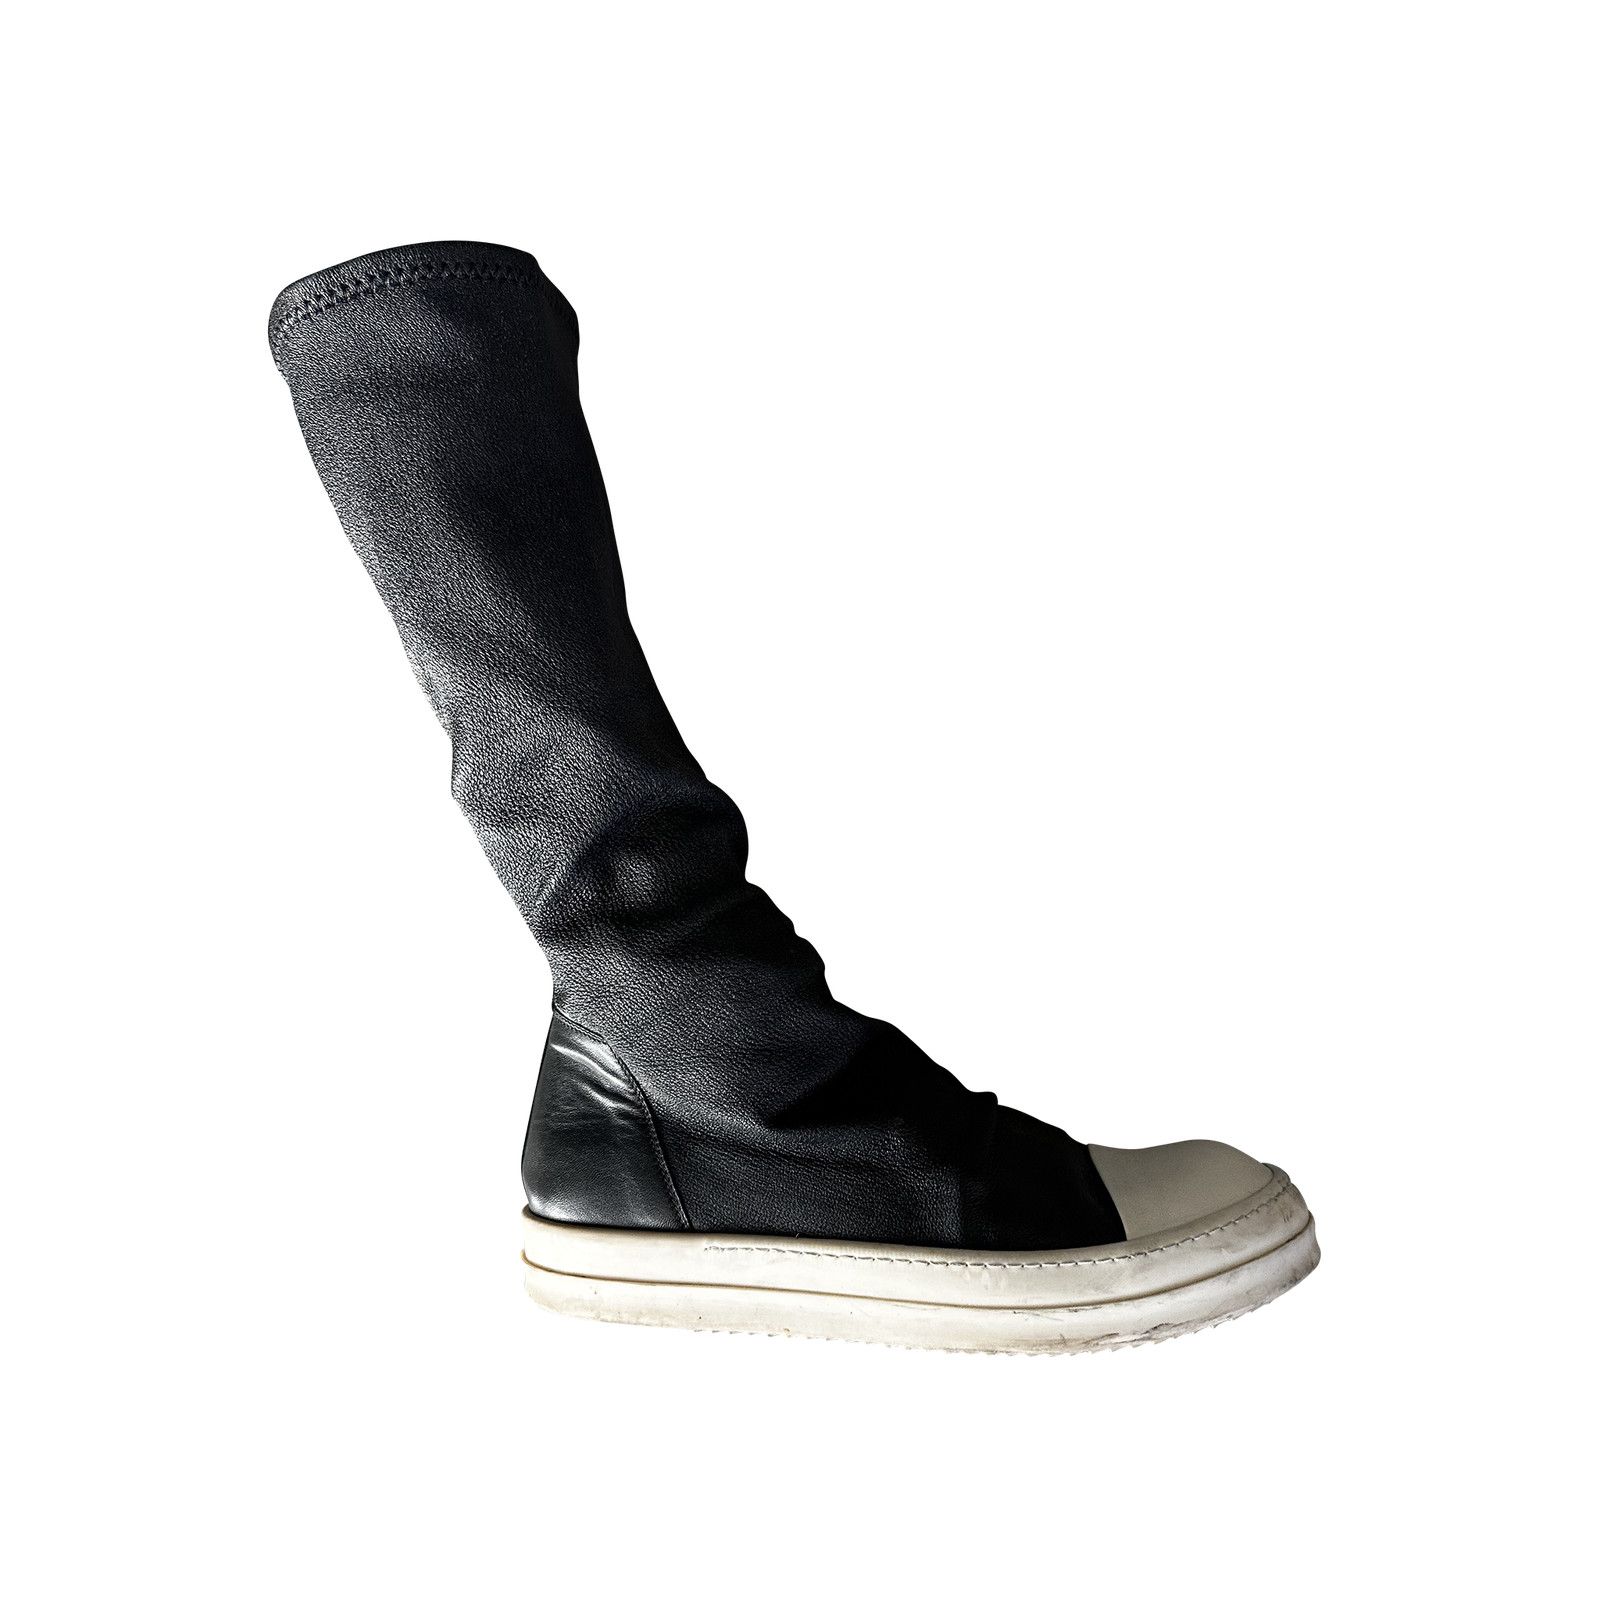 Rick Owens Sock Ramone High-top Sneakers Size US 7 / EU 40 - 1 Preview